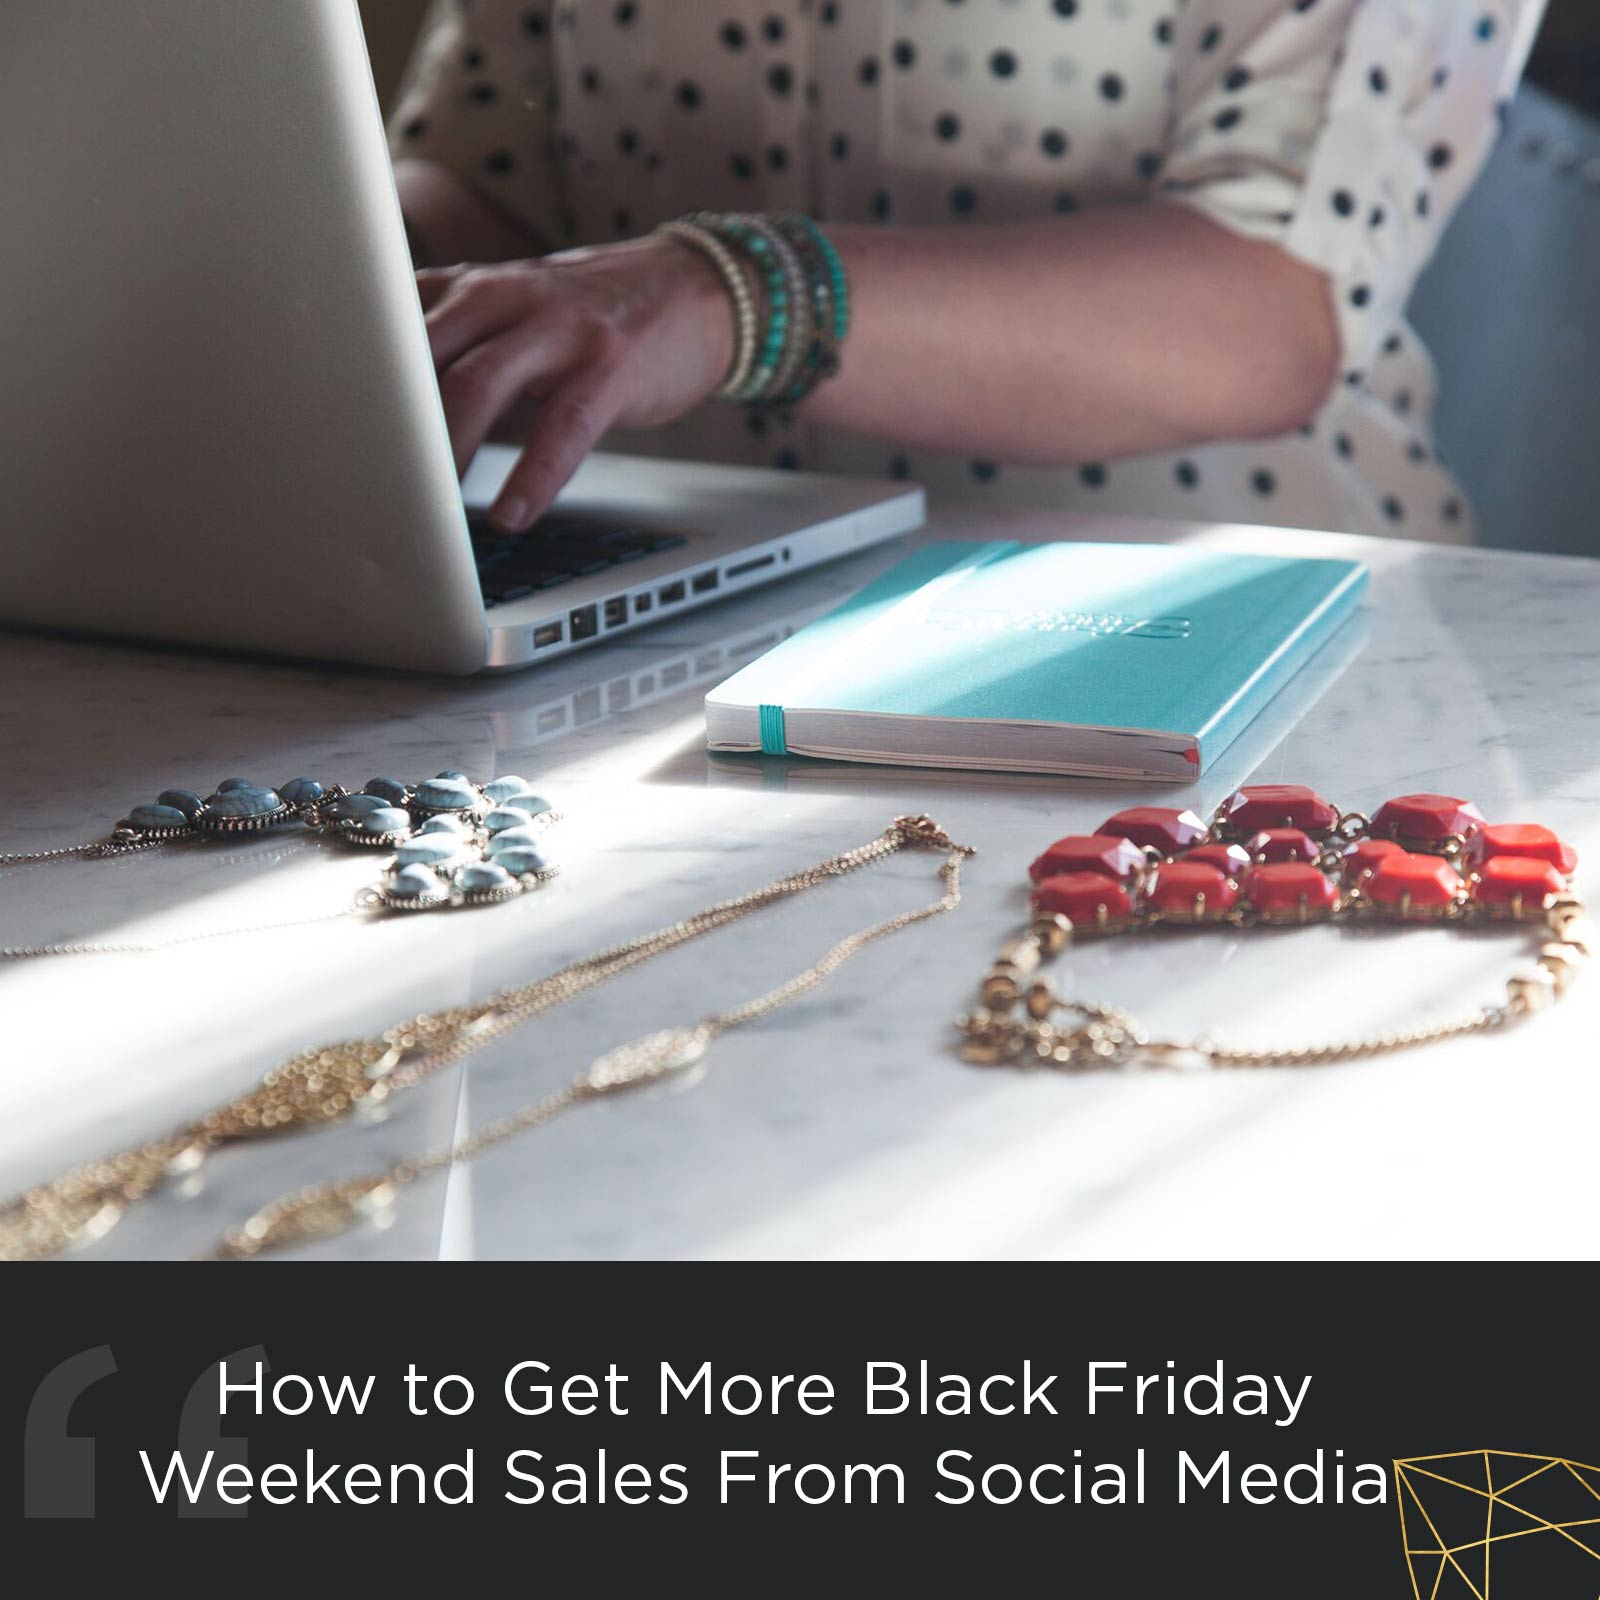 How to Get More Black Friday Weekend Sales From Social Media